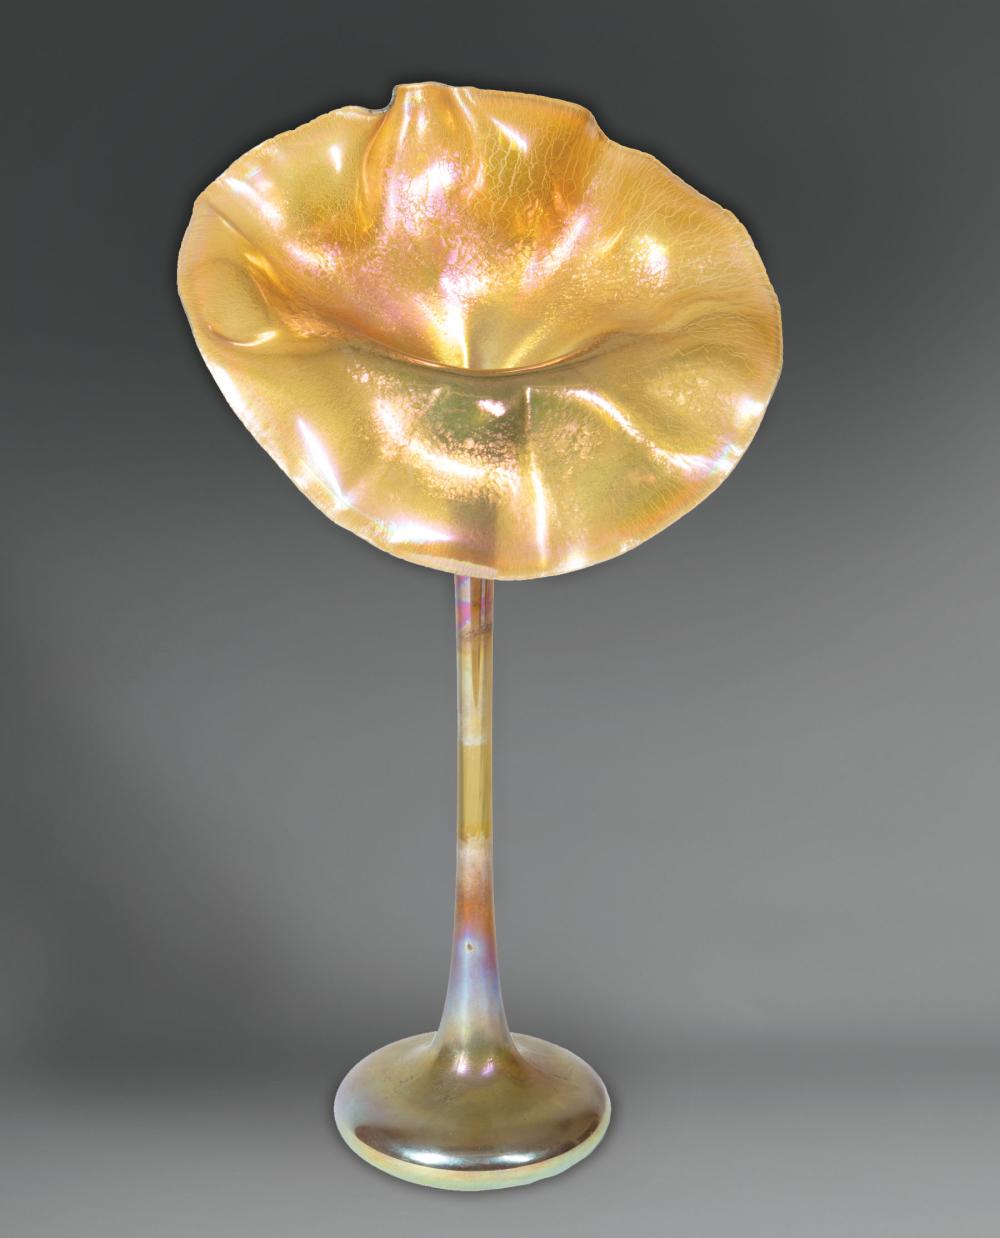 TIFFANY FAVRILE GLASS JACK-IN-THE-PULPIT